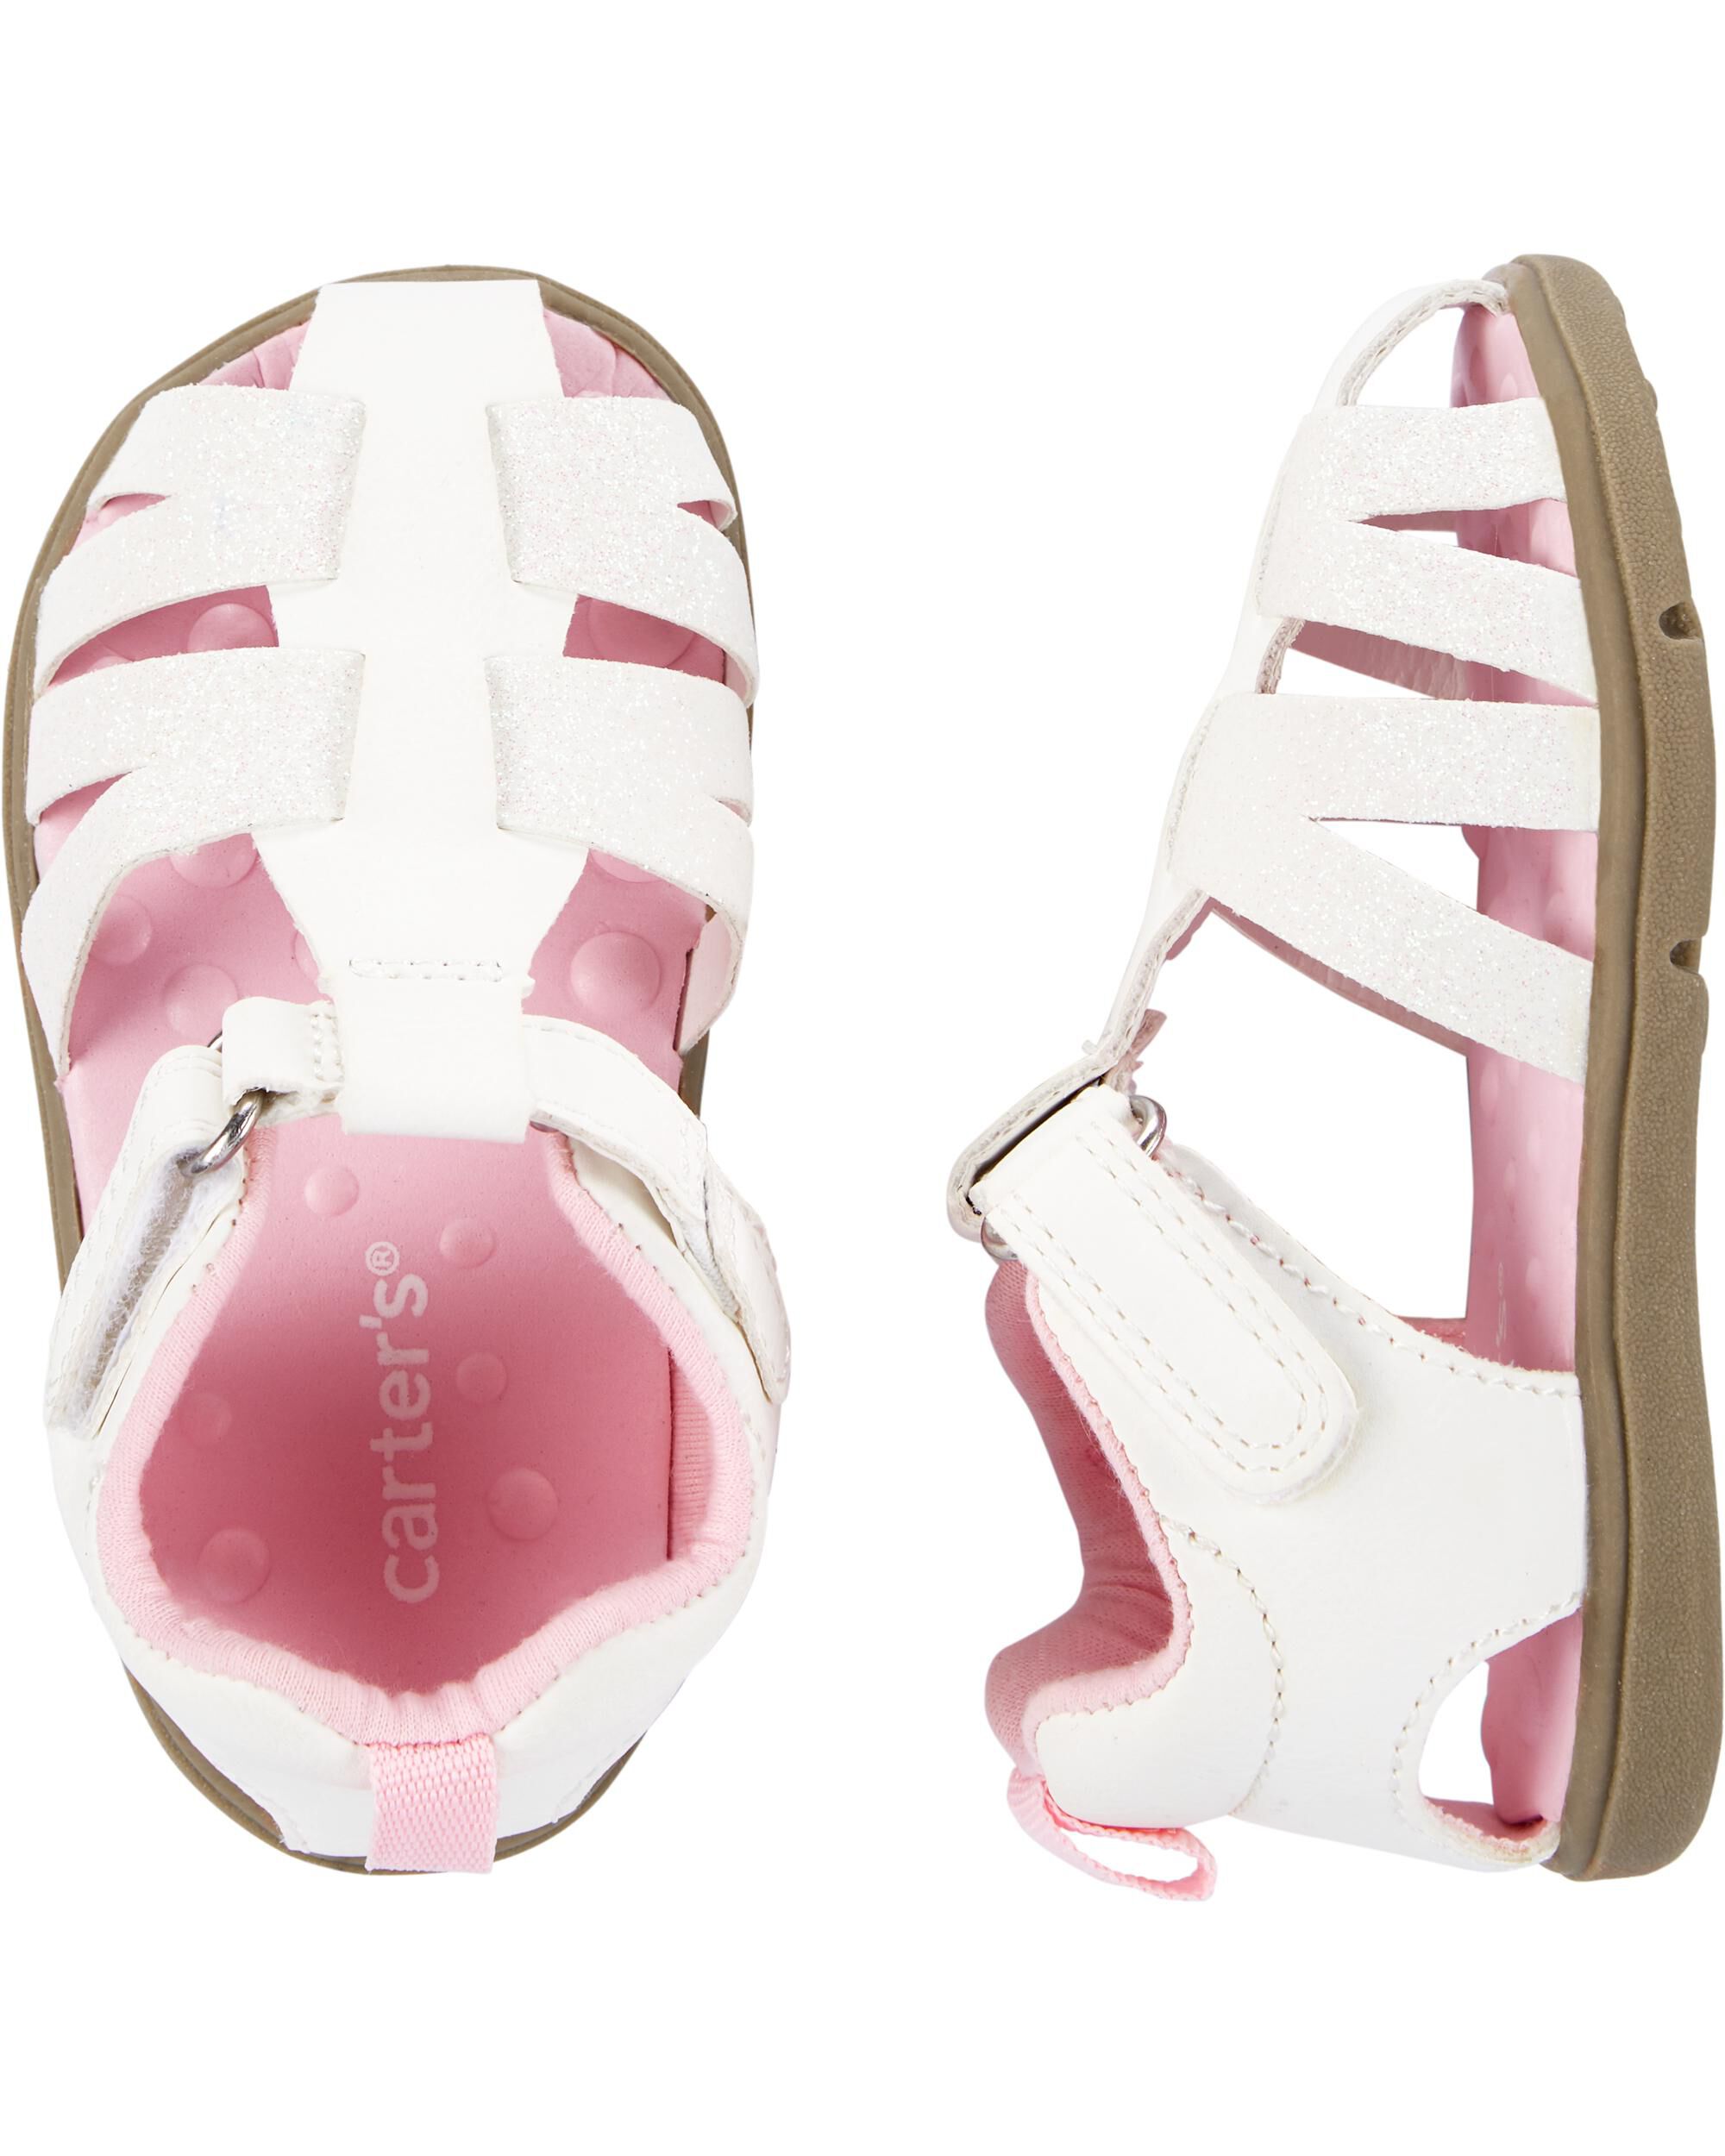 Fisherman Sandal Baby Shoes | carters 